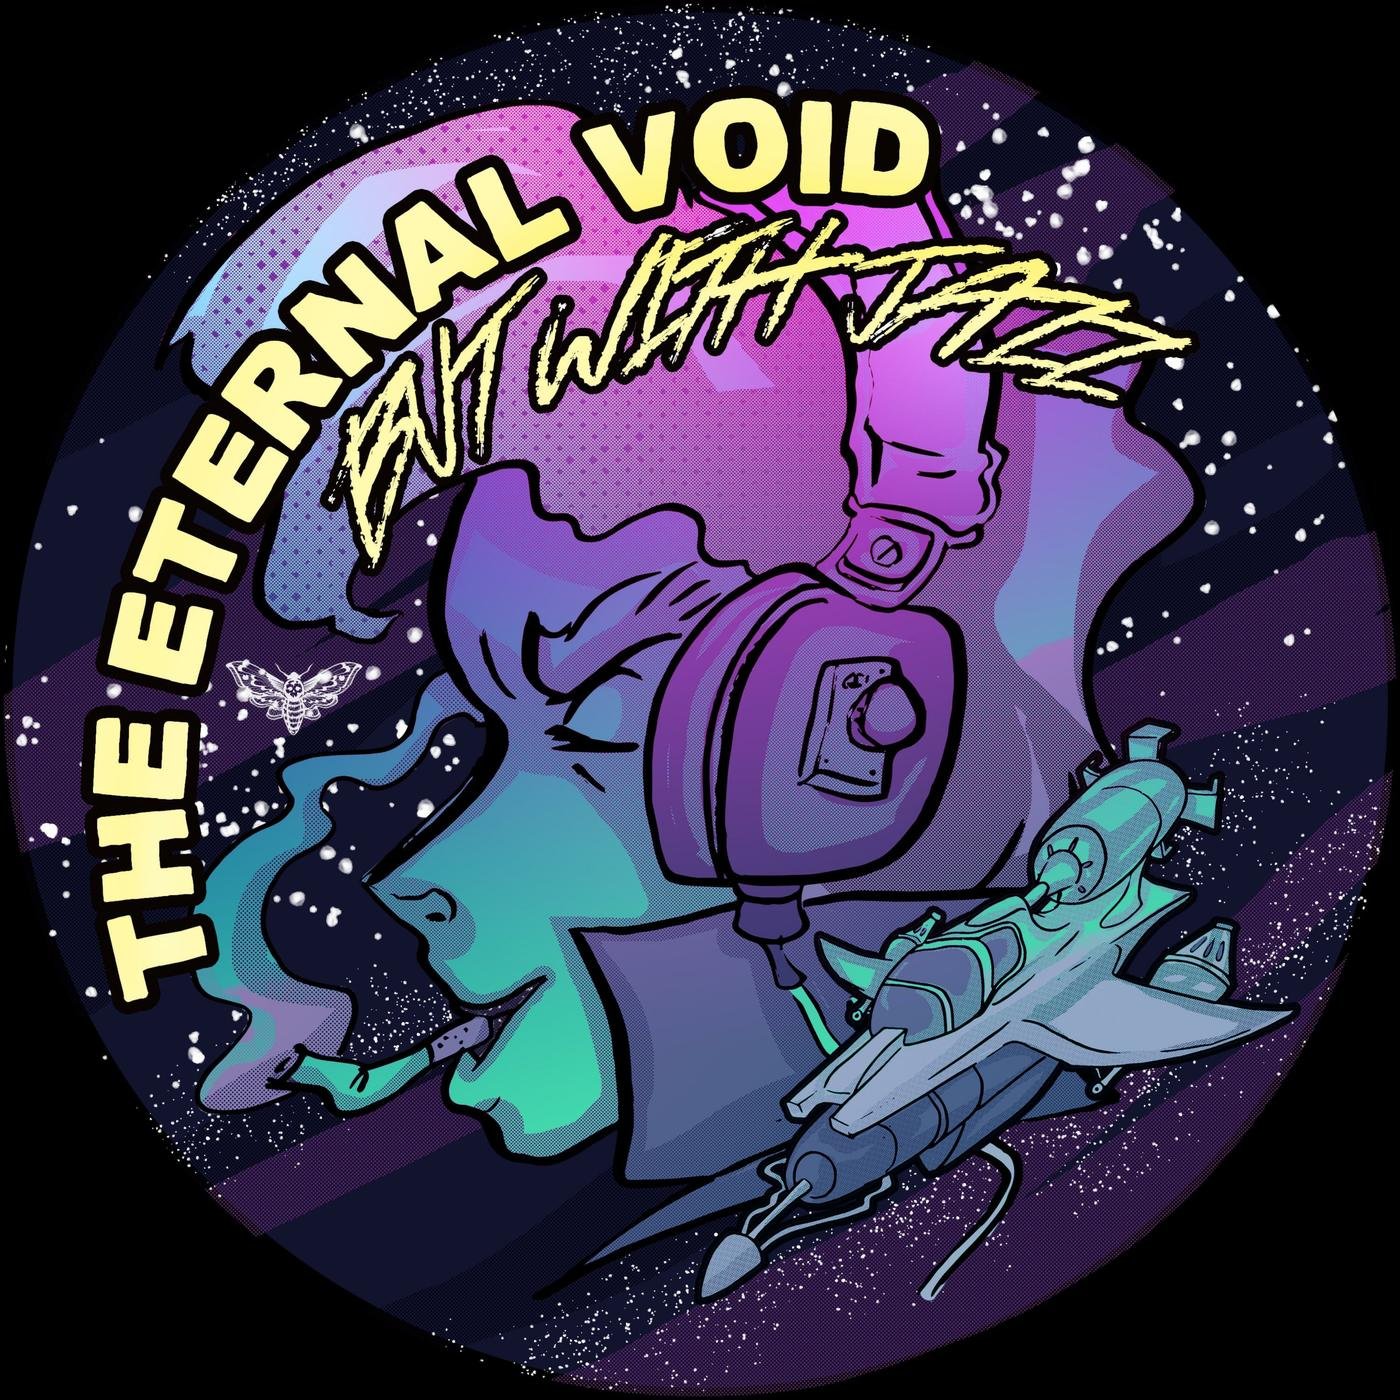 Eternal Void: Stephanie, A.P. Strange, and Kiki discuss dreams &amp; synchronicities